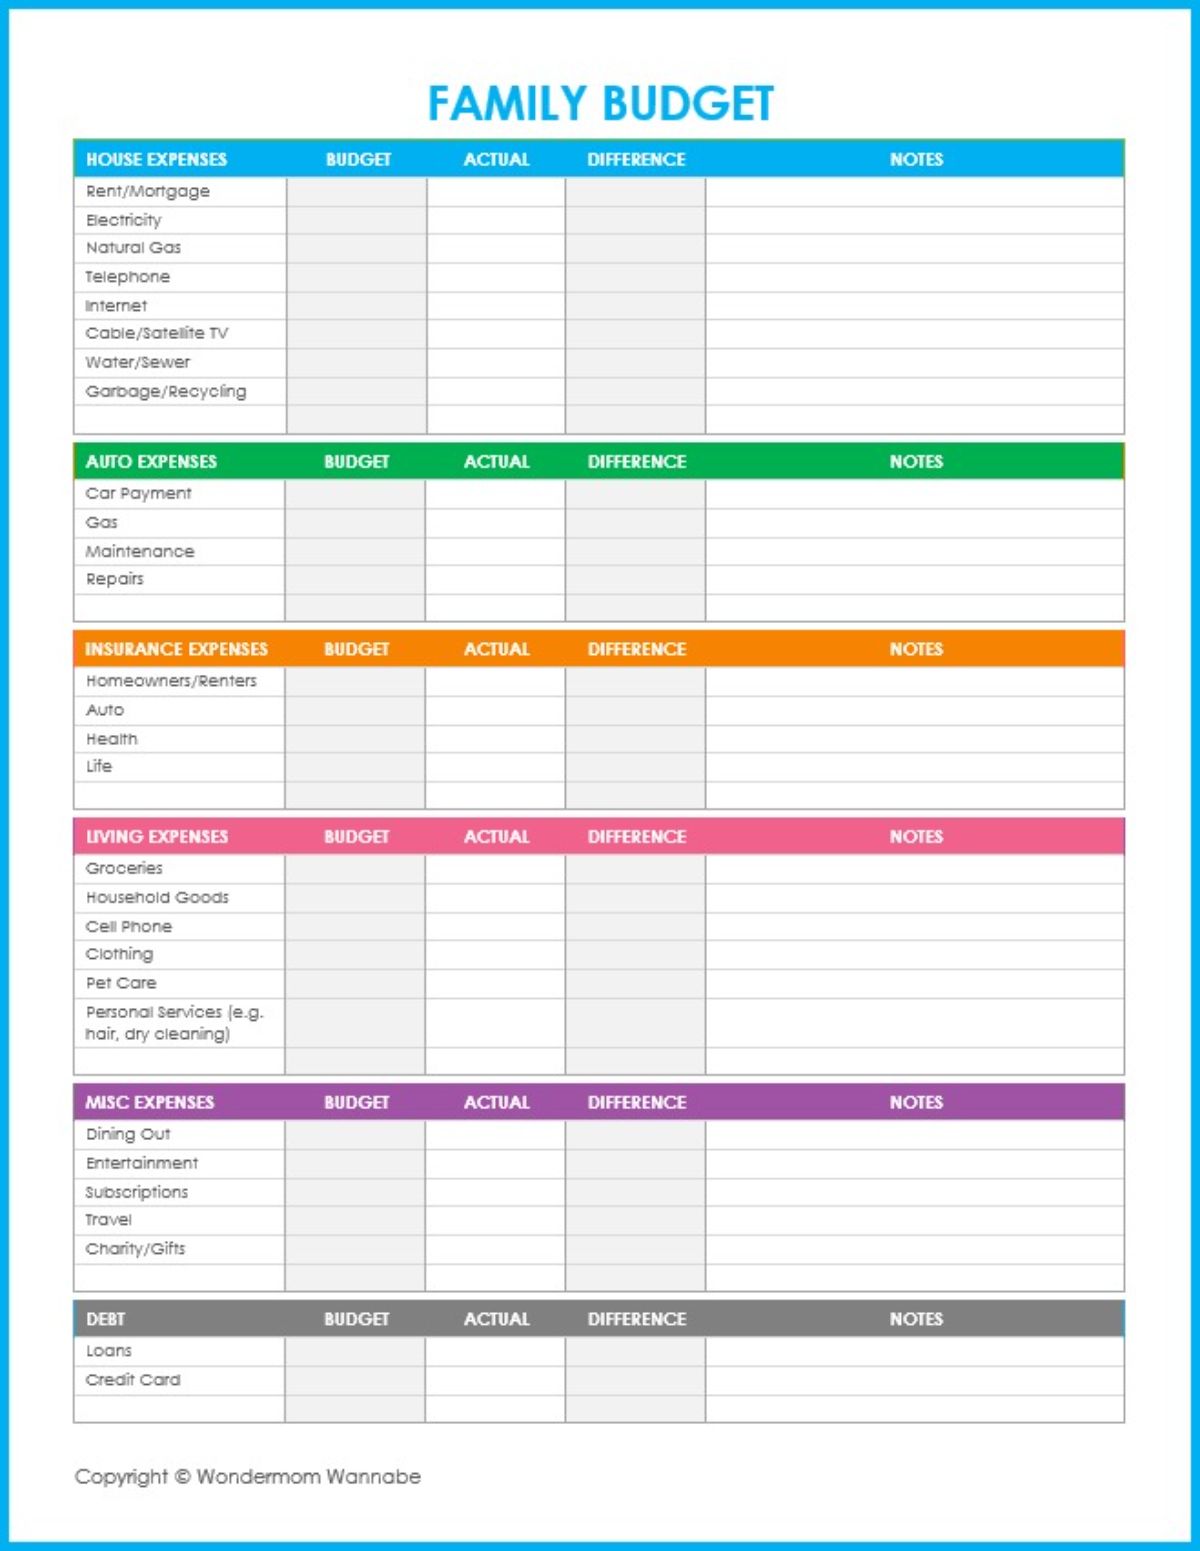 A printable family budget template with different colors for worksheets.